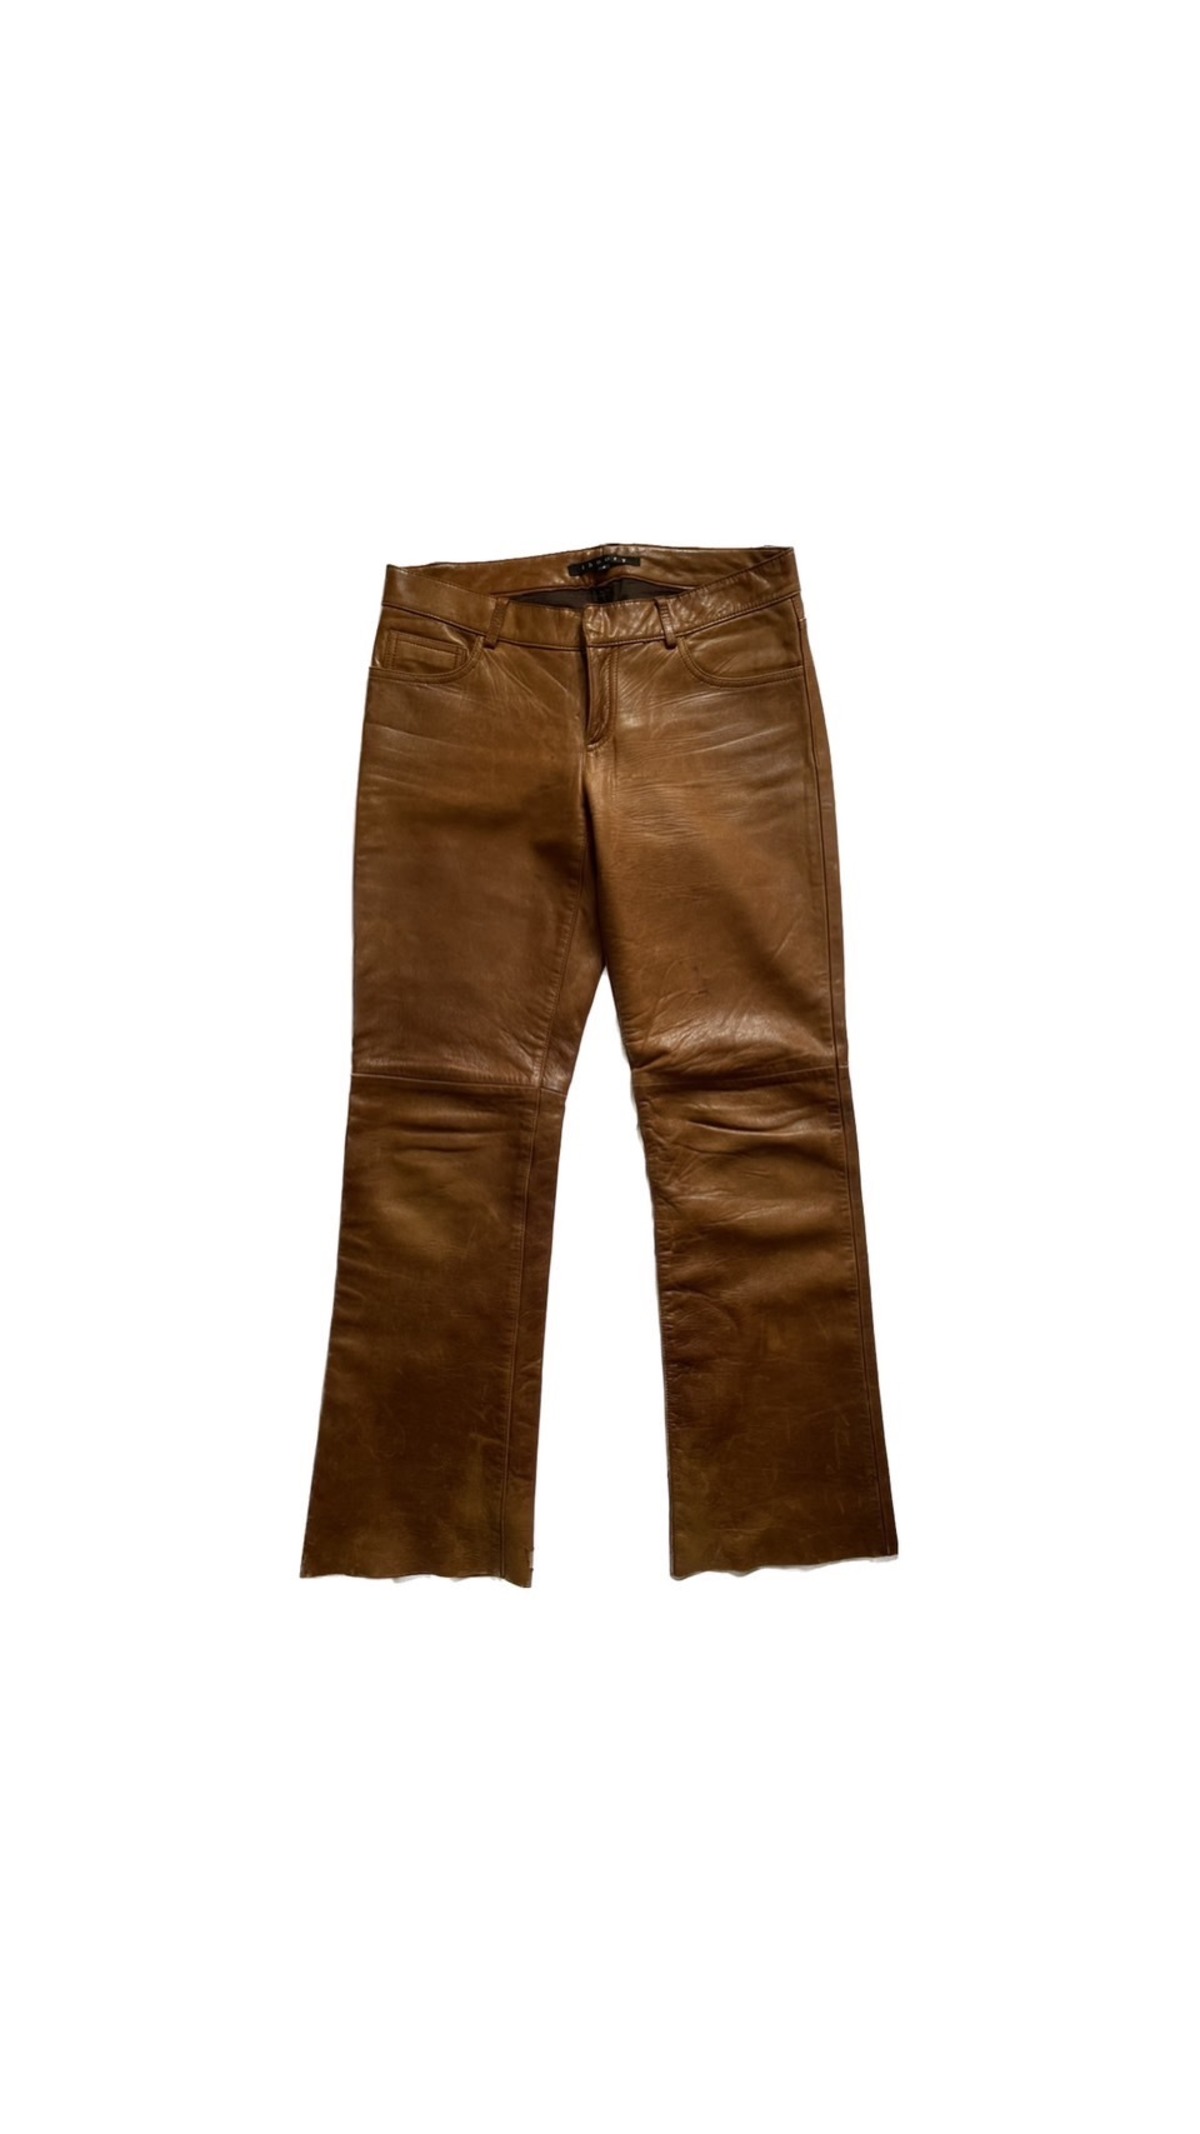 theory / brown leather pants | adorer